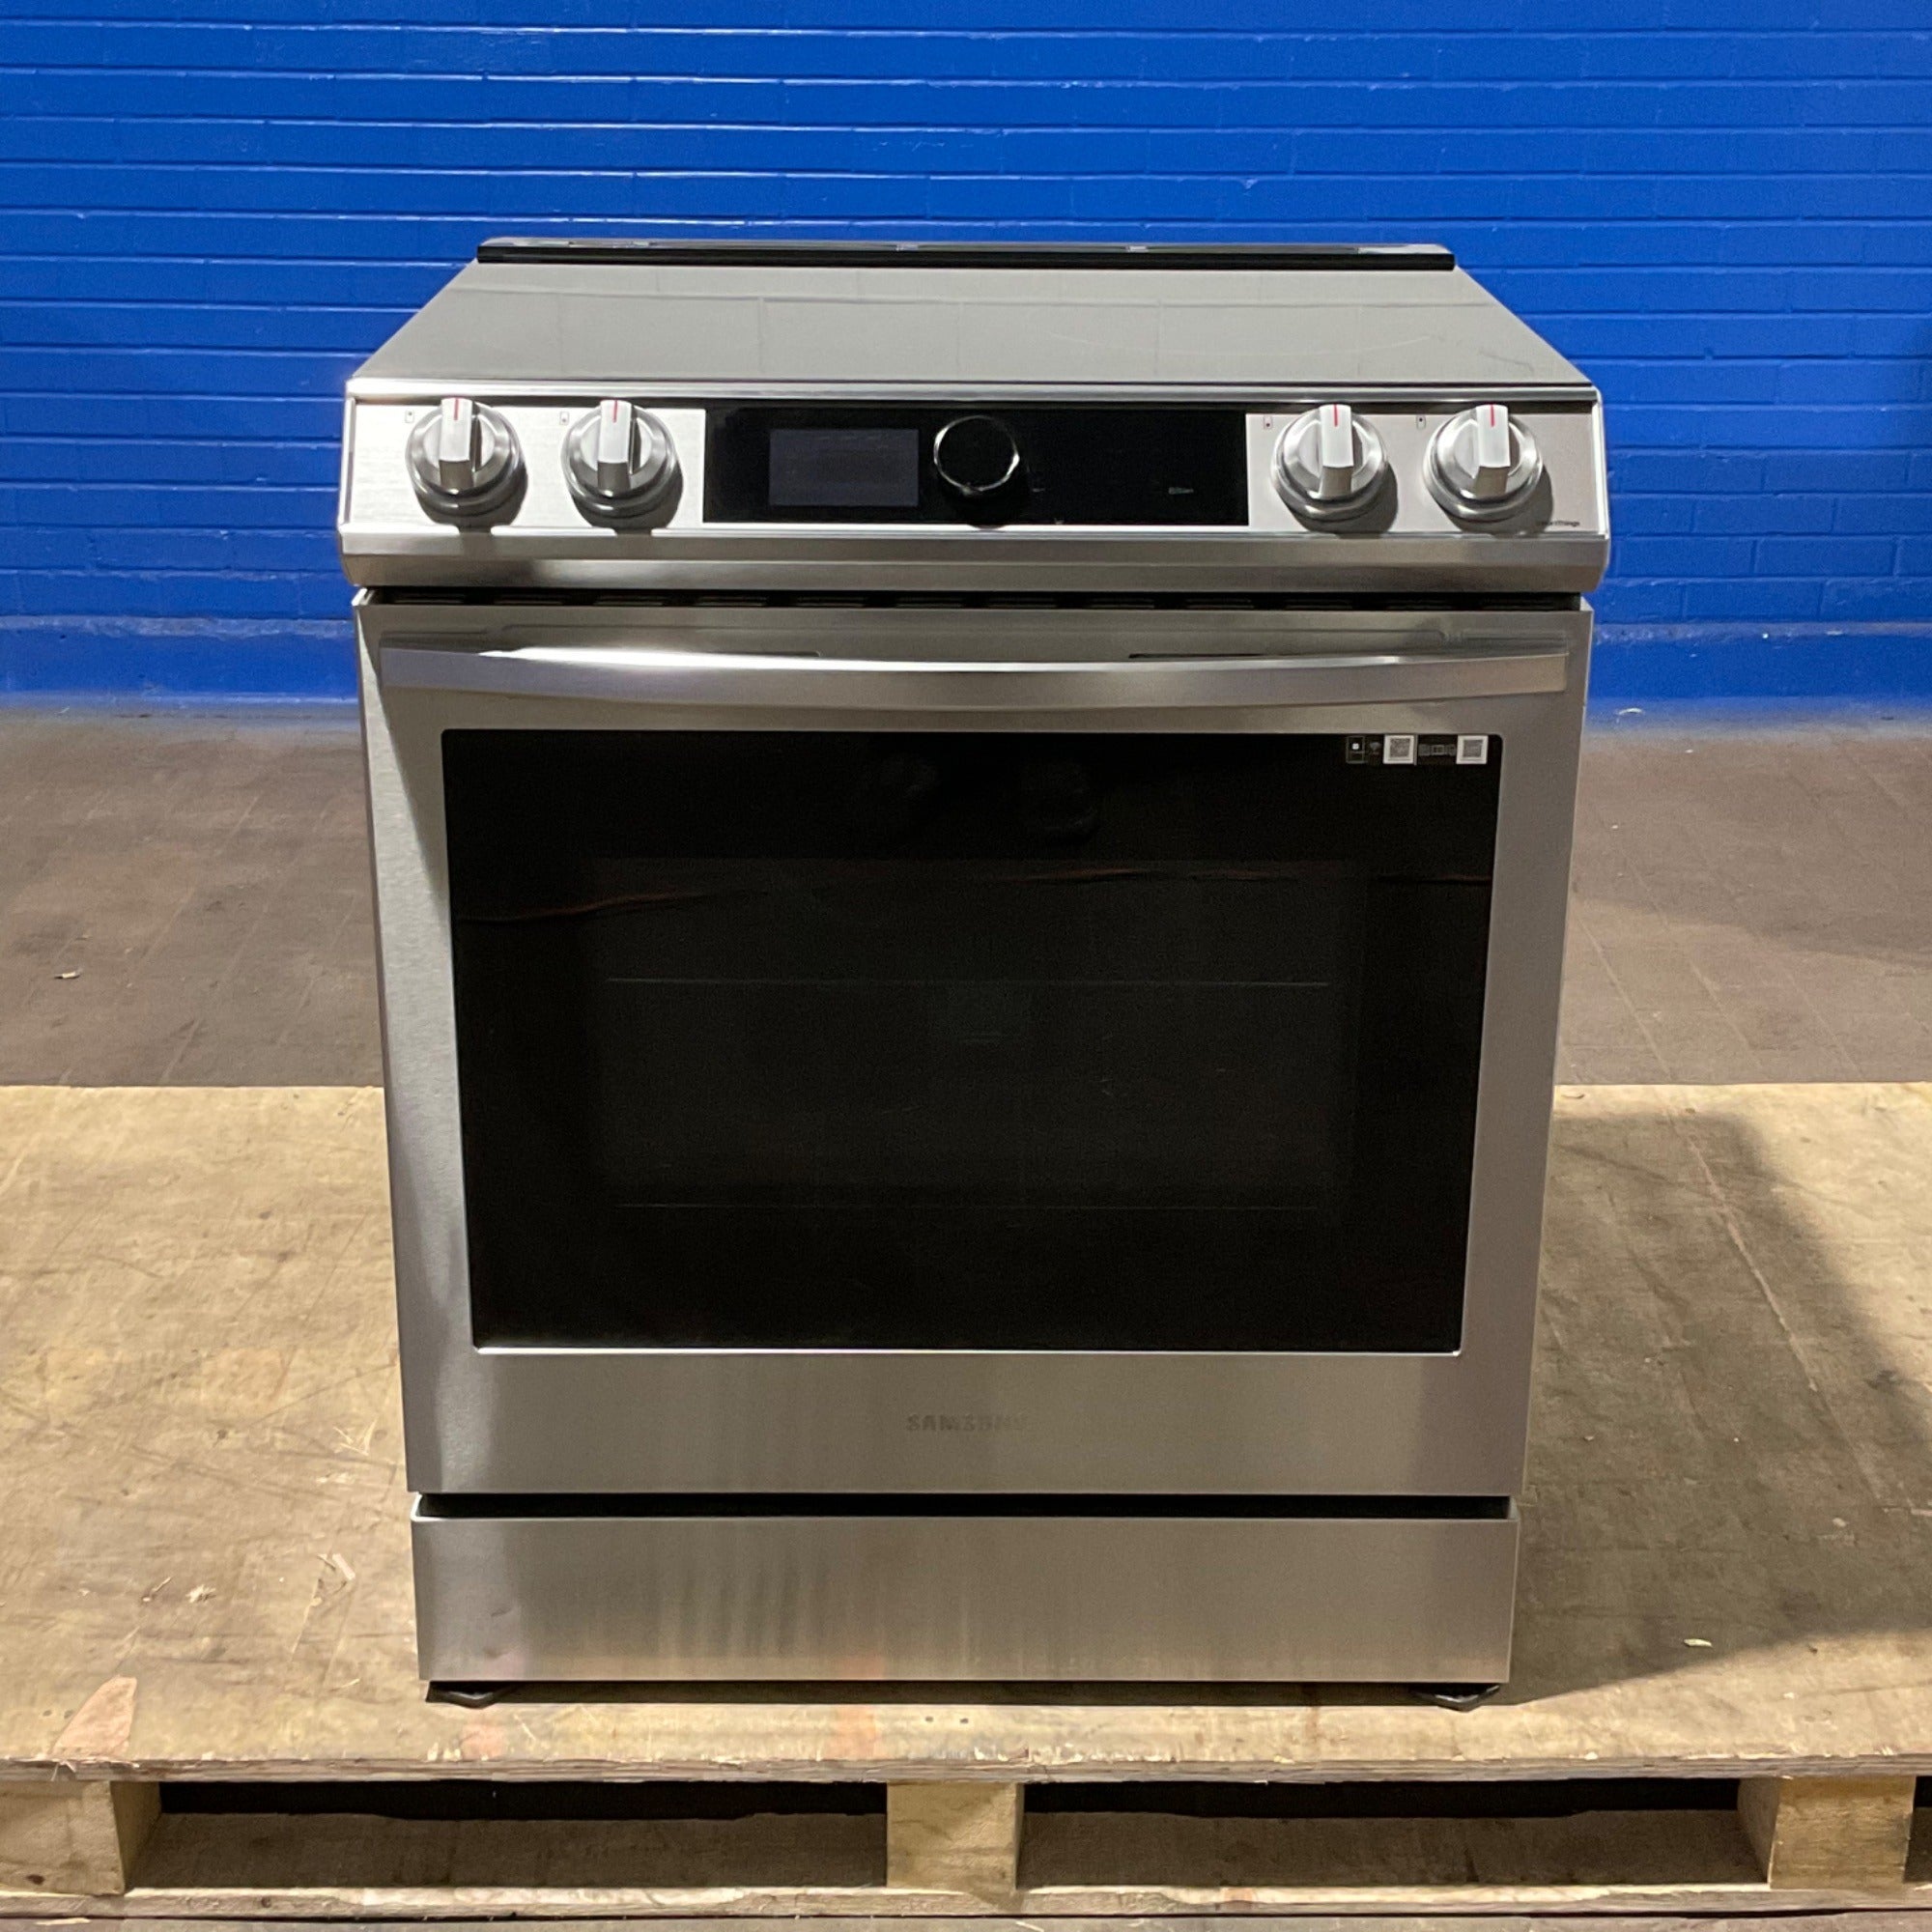 Samsung 6.0 cu. ft. Smart Slide-in Gas Range with Air Fry in